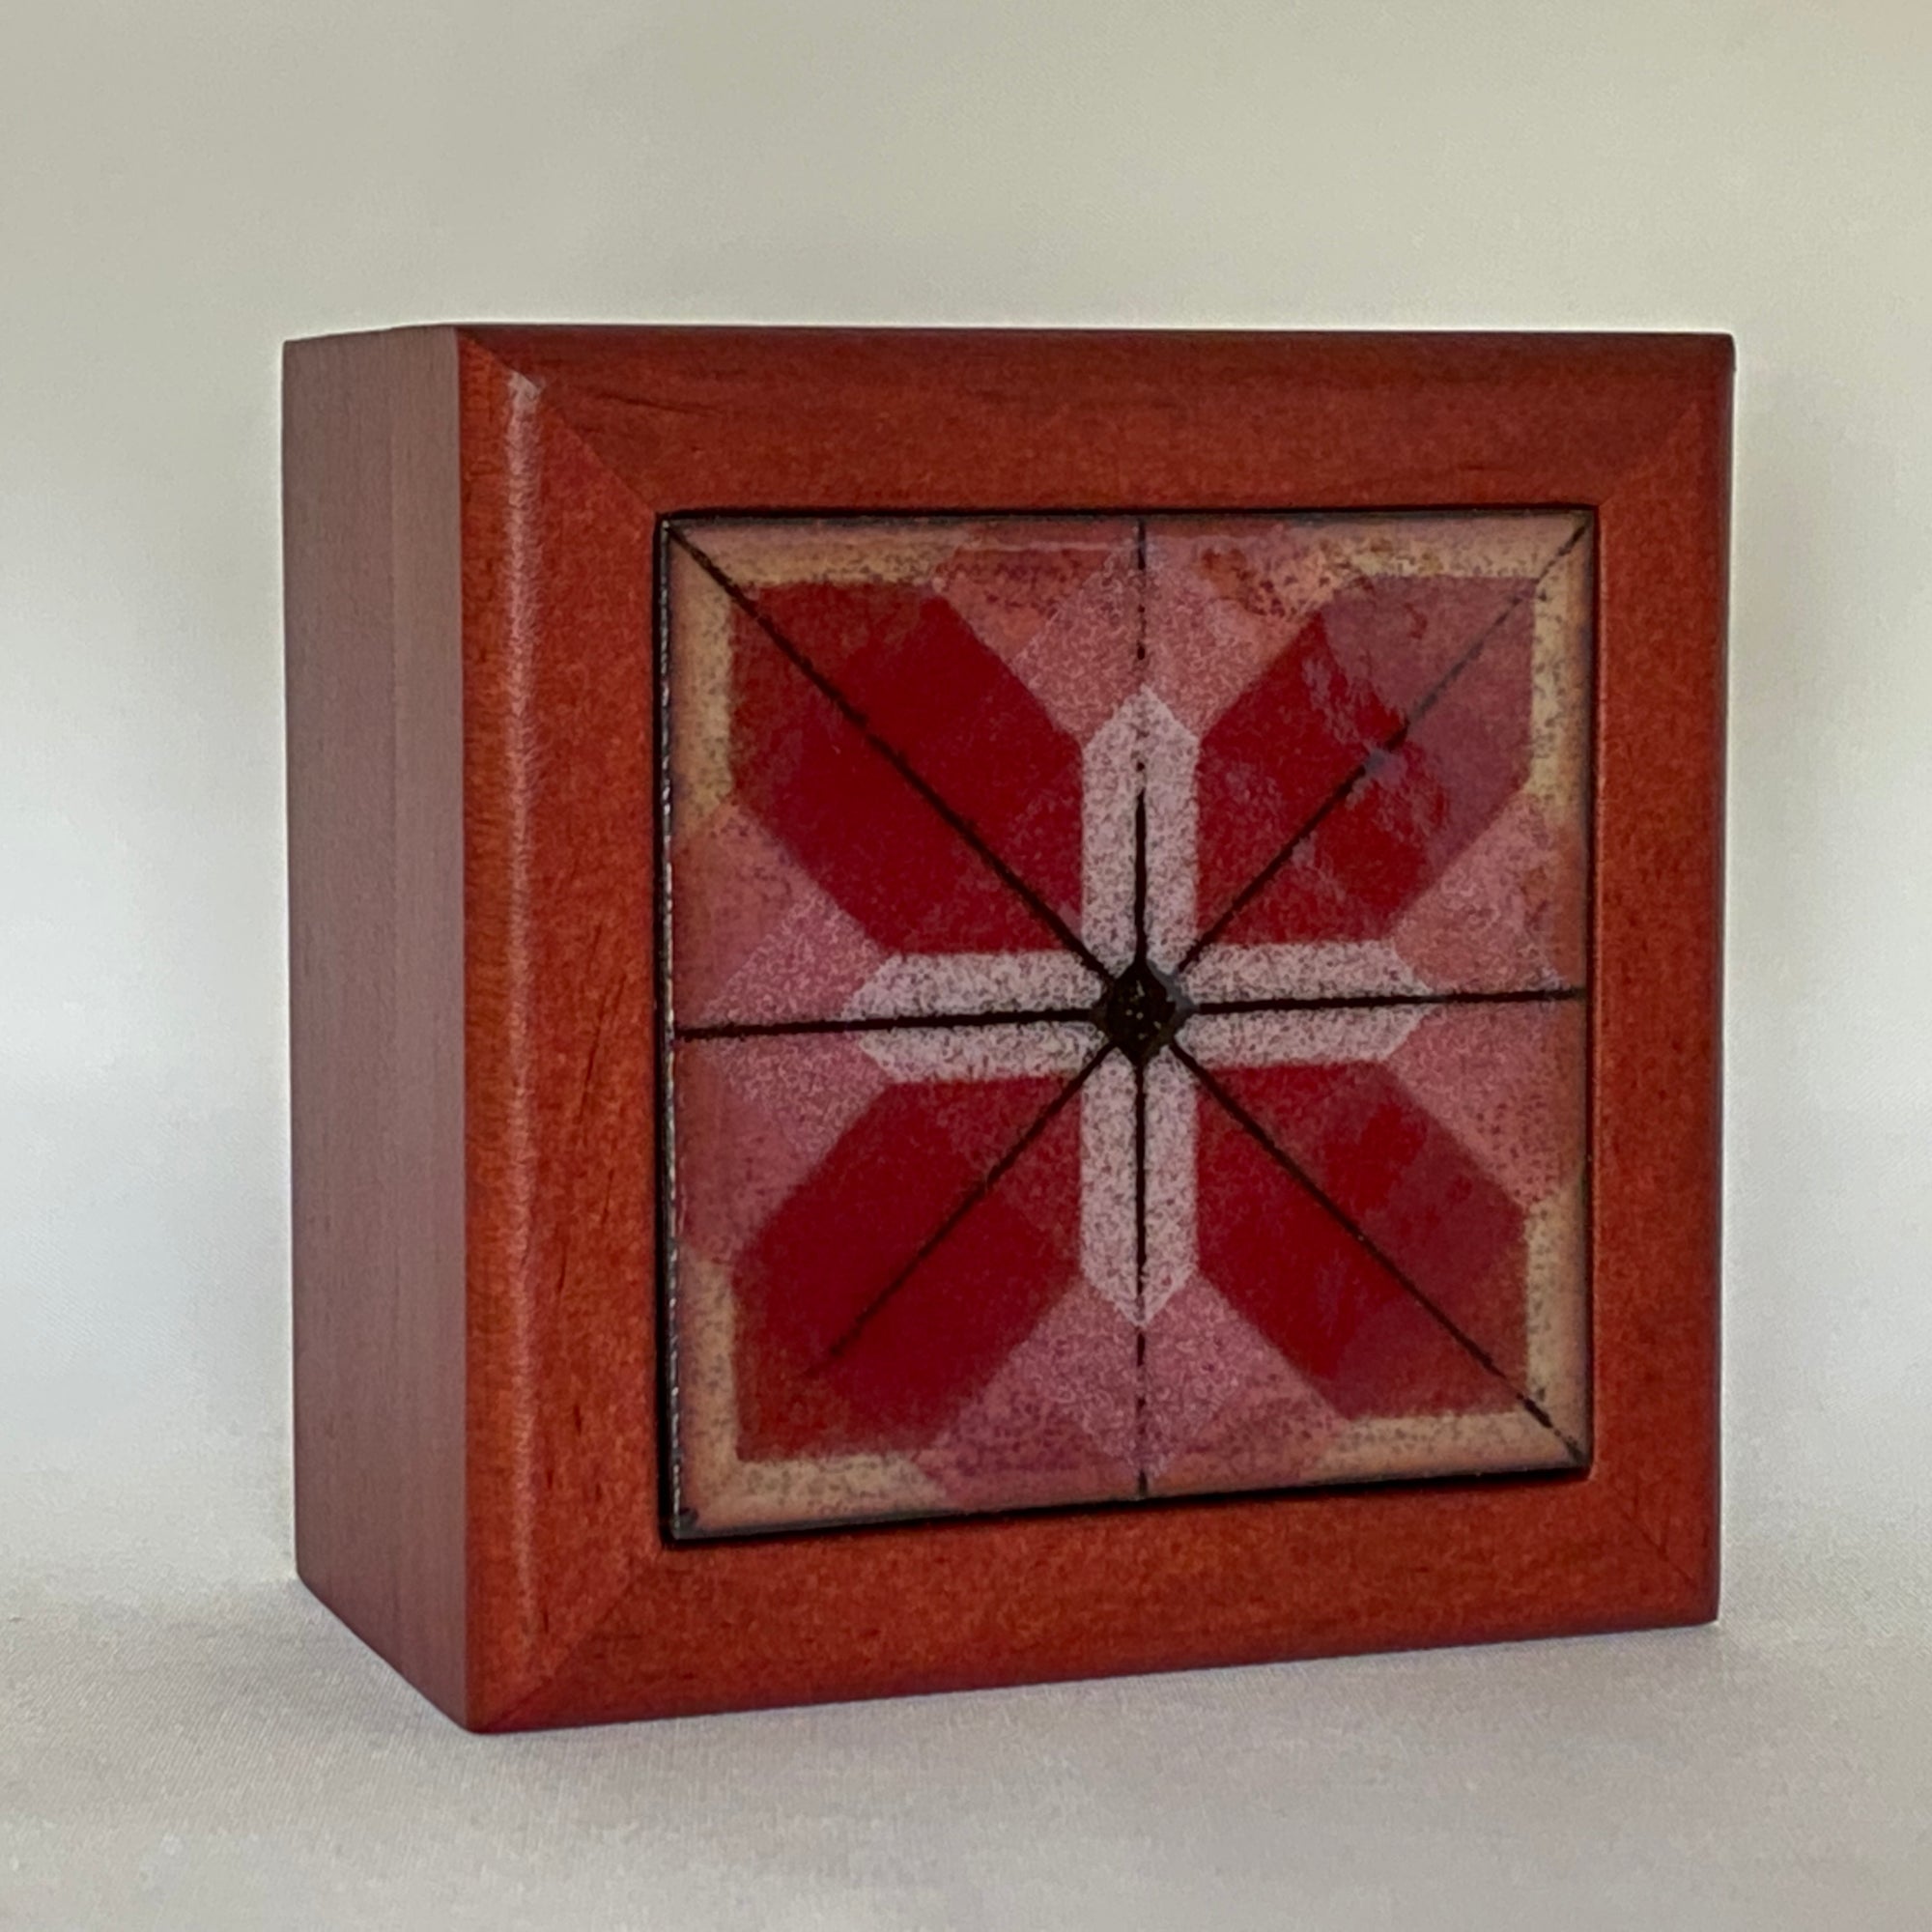 Camille Patton Geometric Pattern Vitreous Enamel Inlay in lid of wooden box